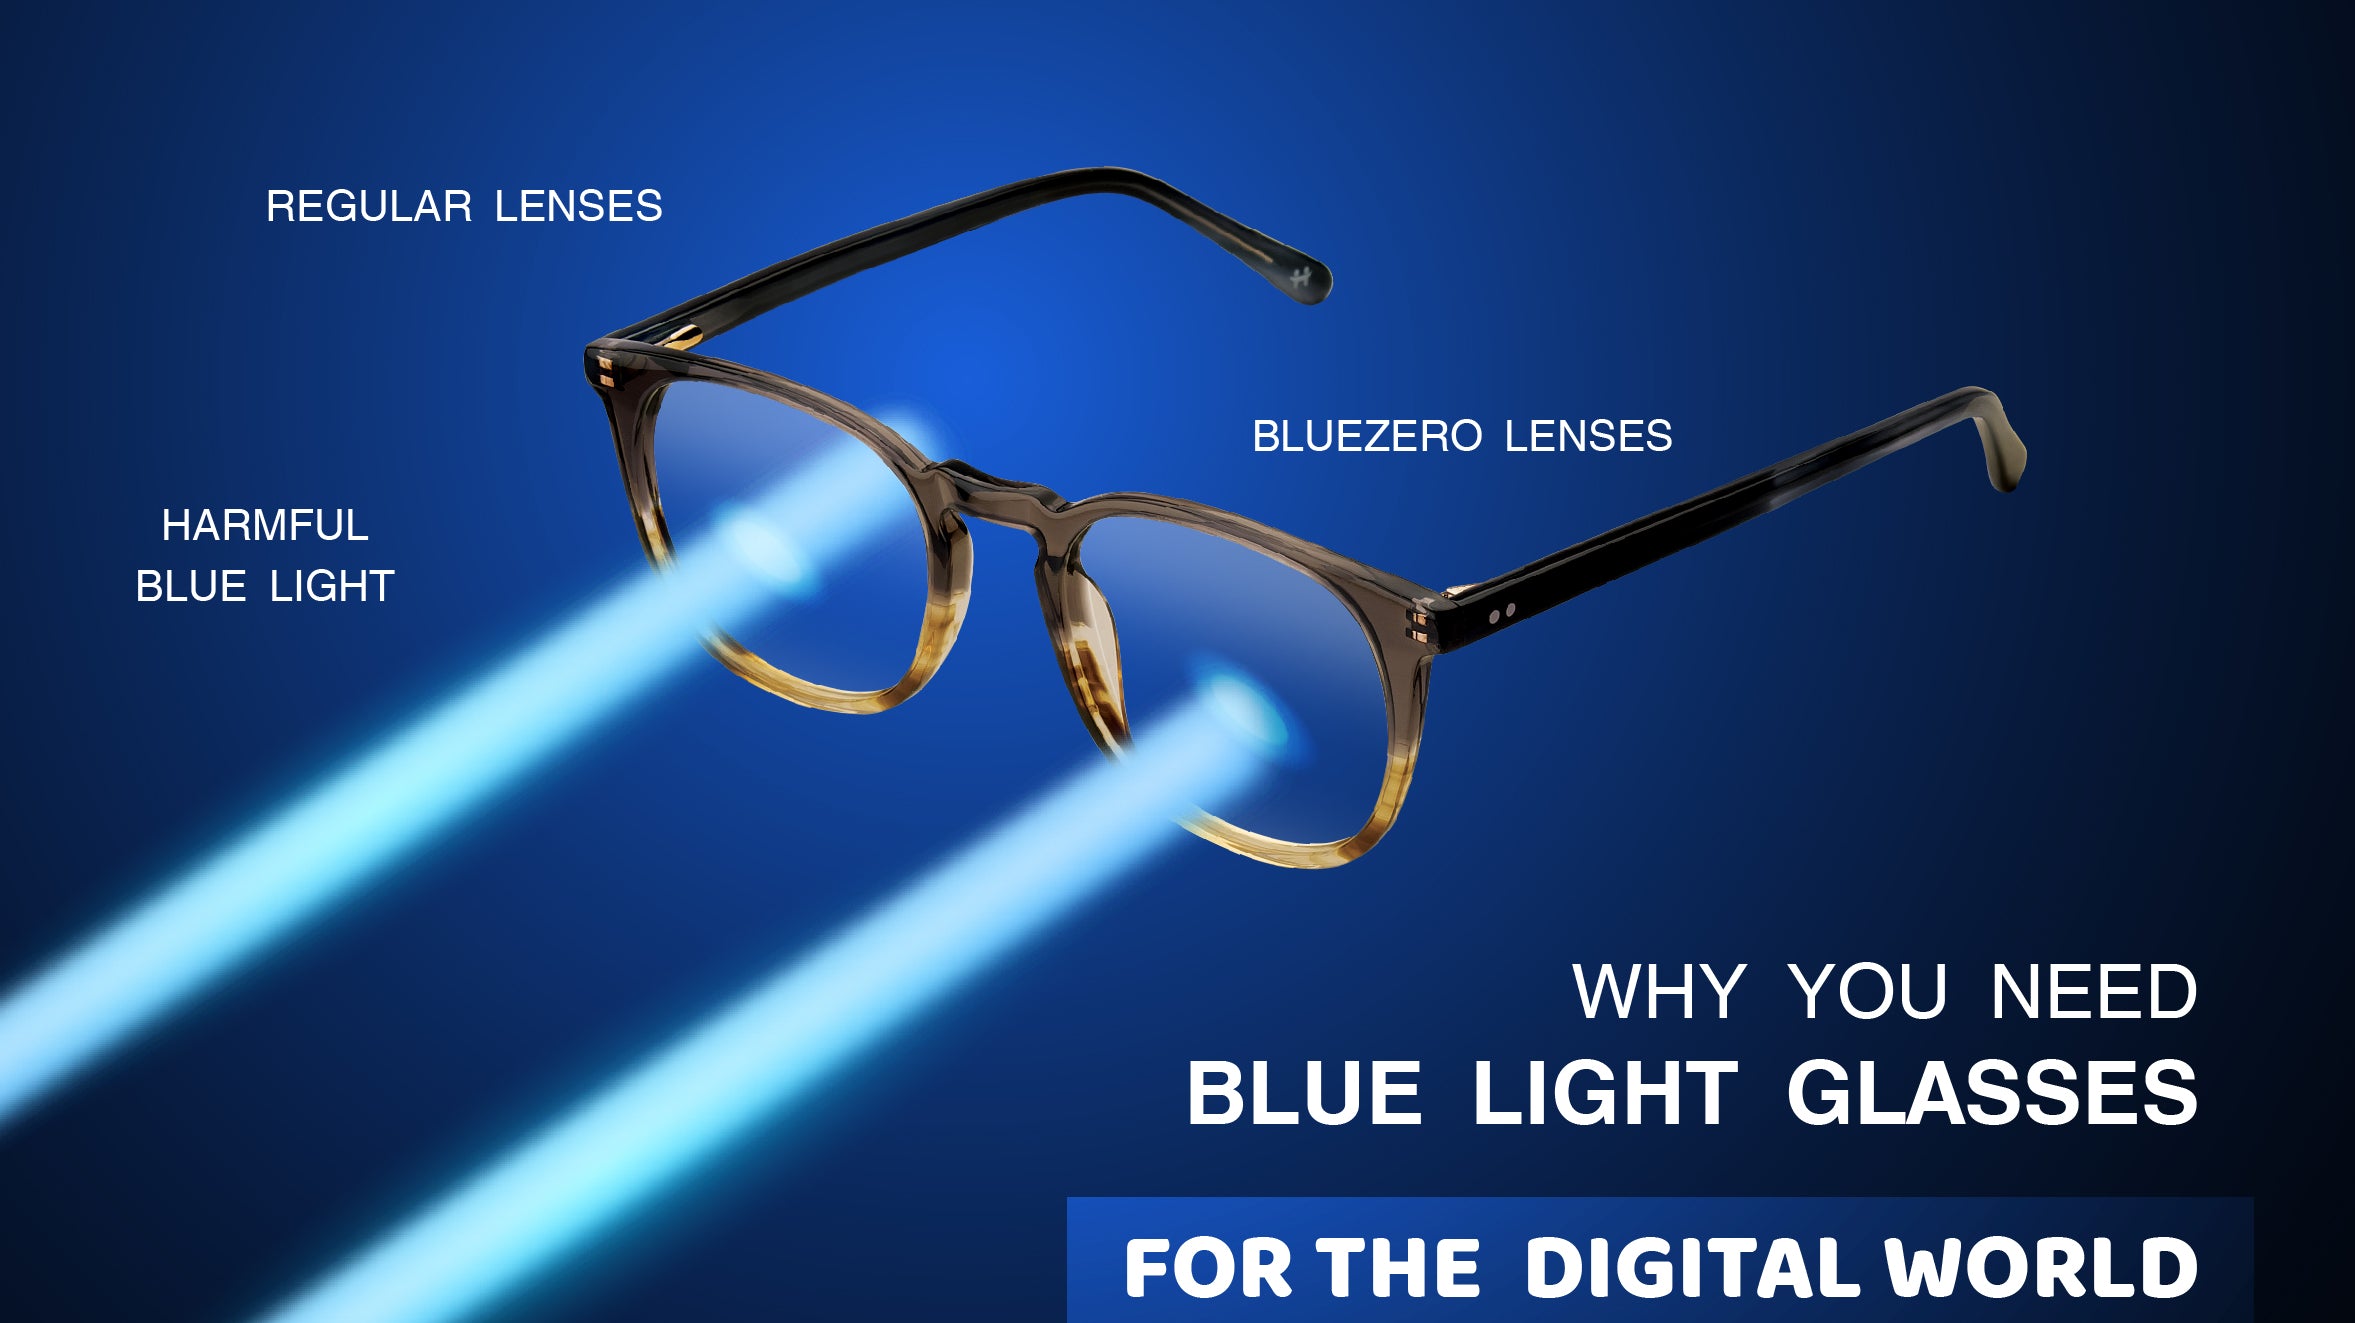 Why you need blue light glasses for the digital world